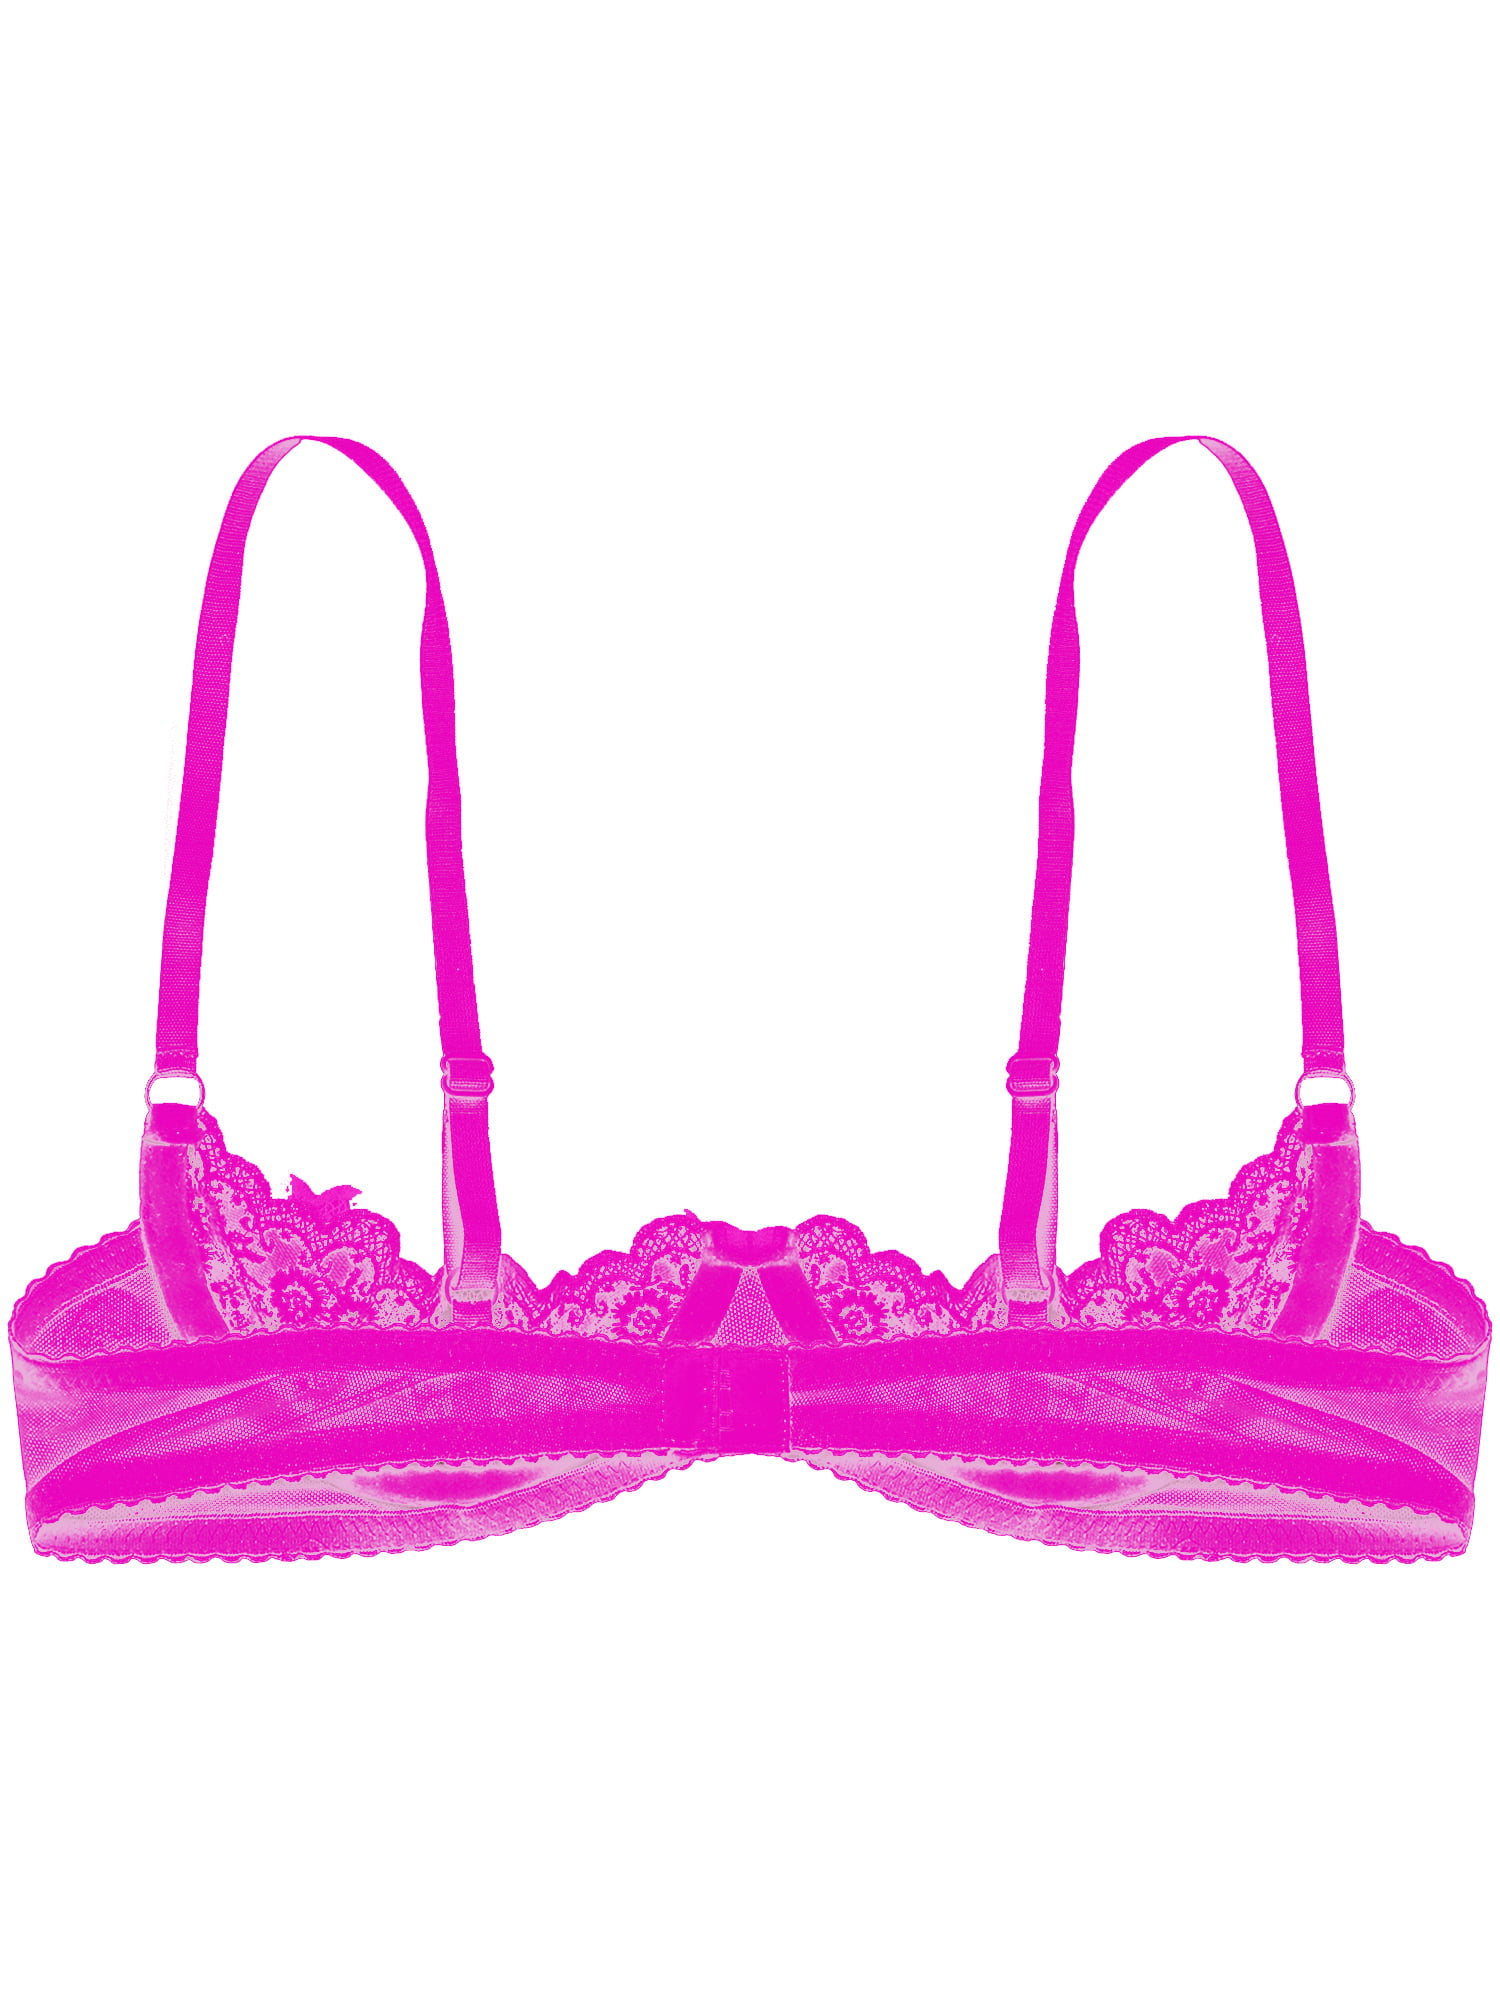 Sexy Lace Sheer Bra With Padded Pink Starbucks Cup For Women Available In  Large Sizes 3/4 Cup 2023 Collection From Freshadang, $12.69